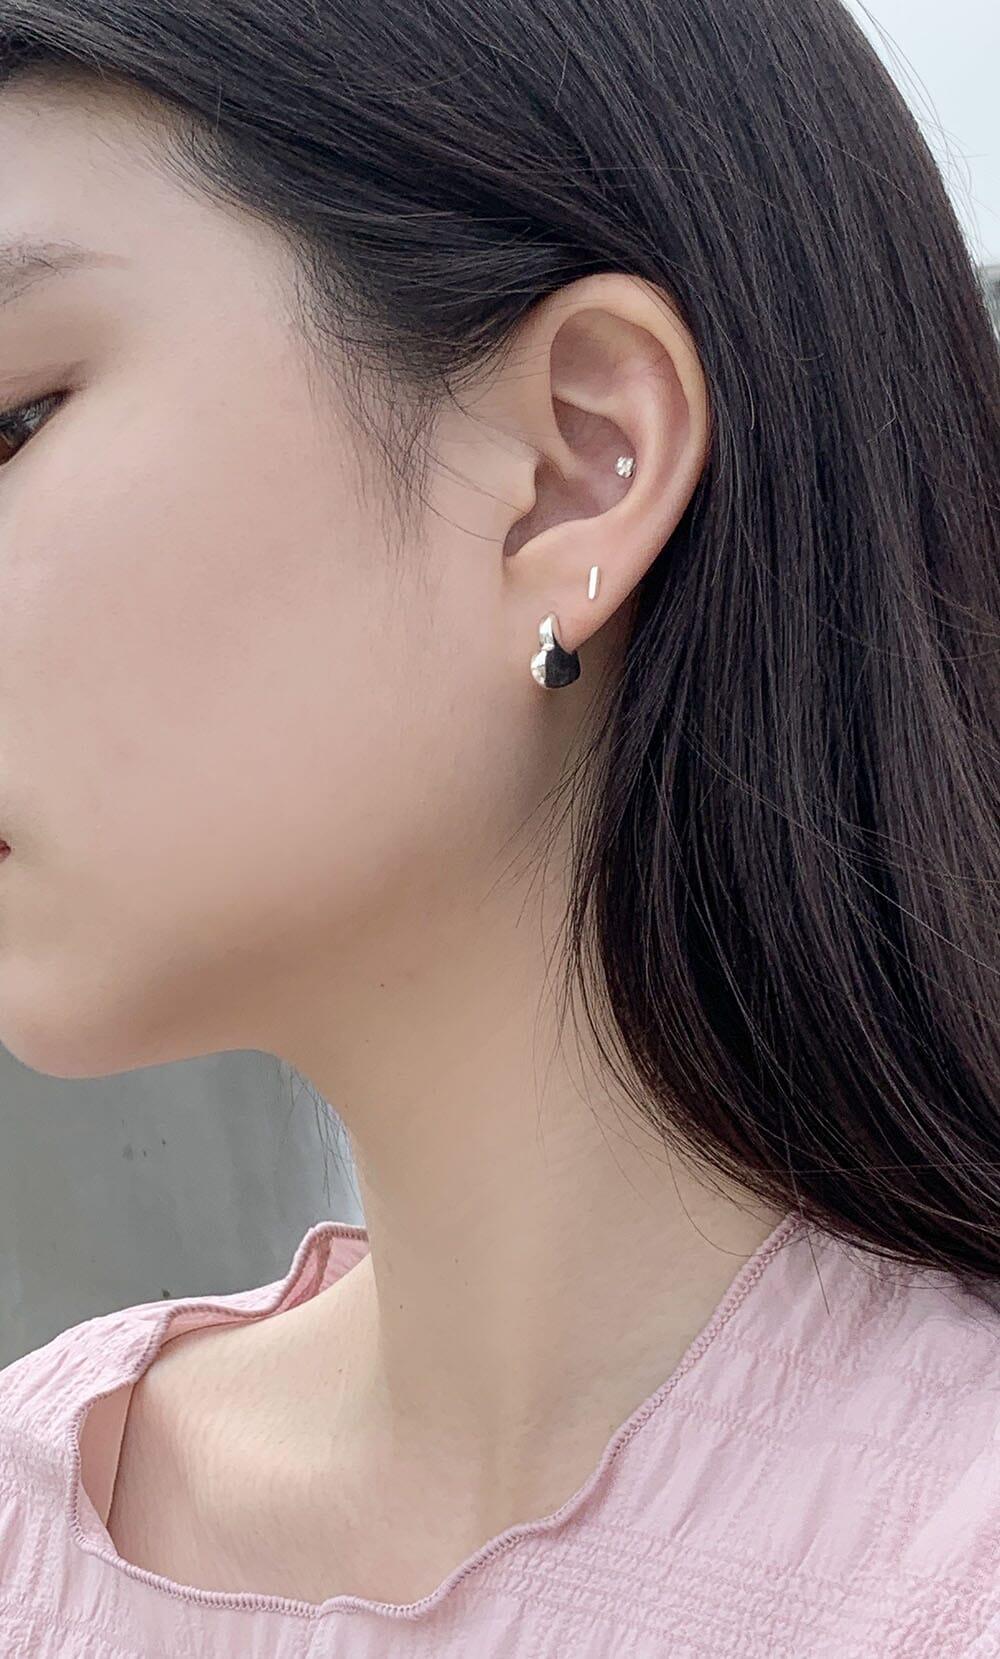 [925 Silver]モエットハートピアス Earrings The Klang 